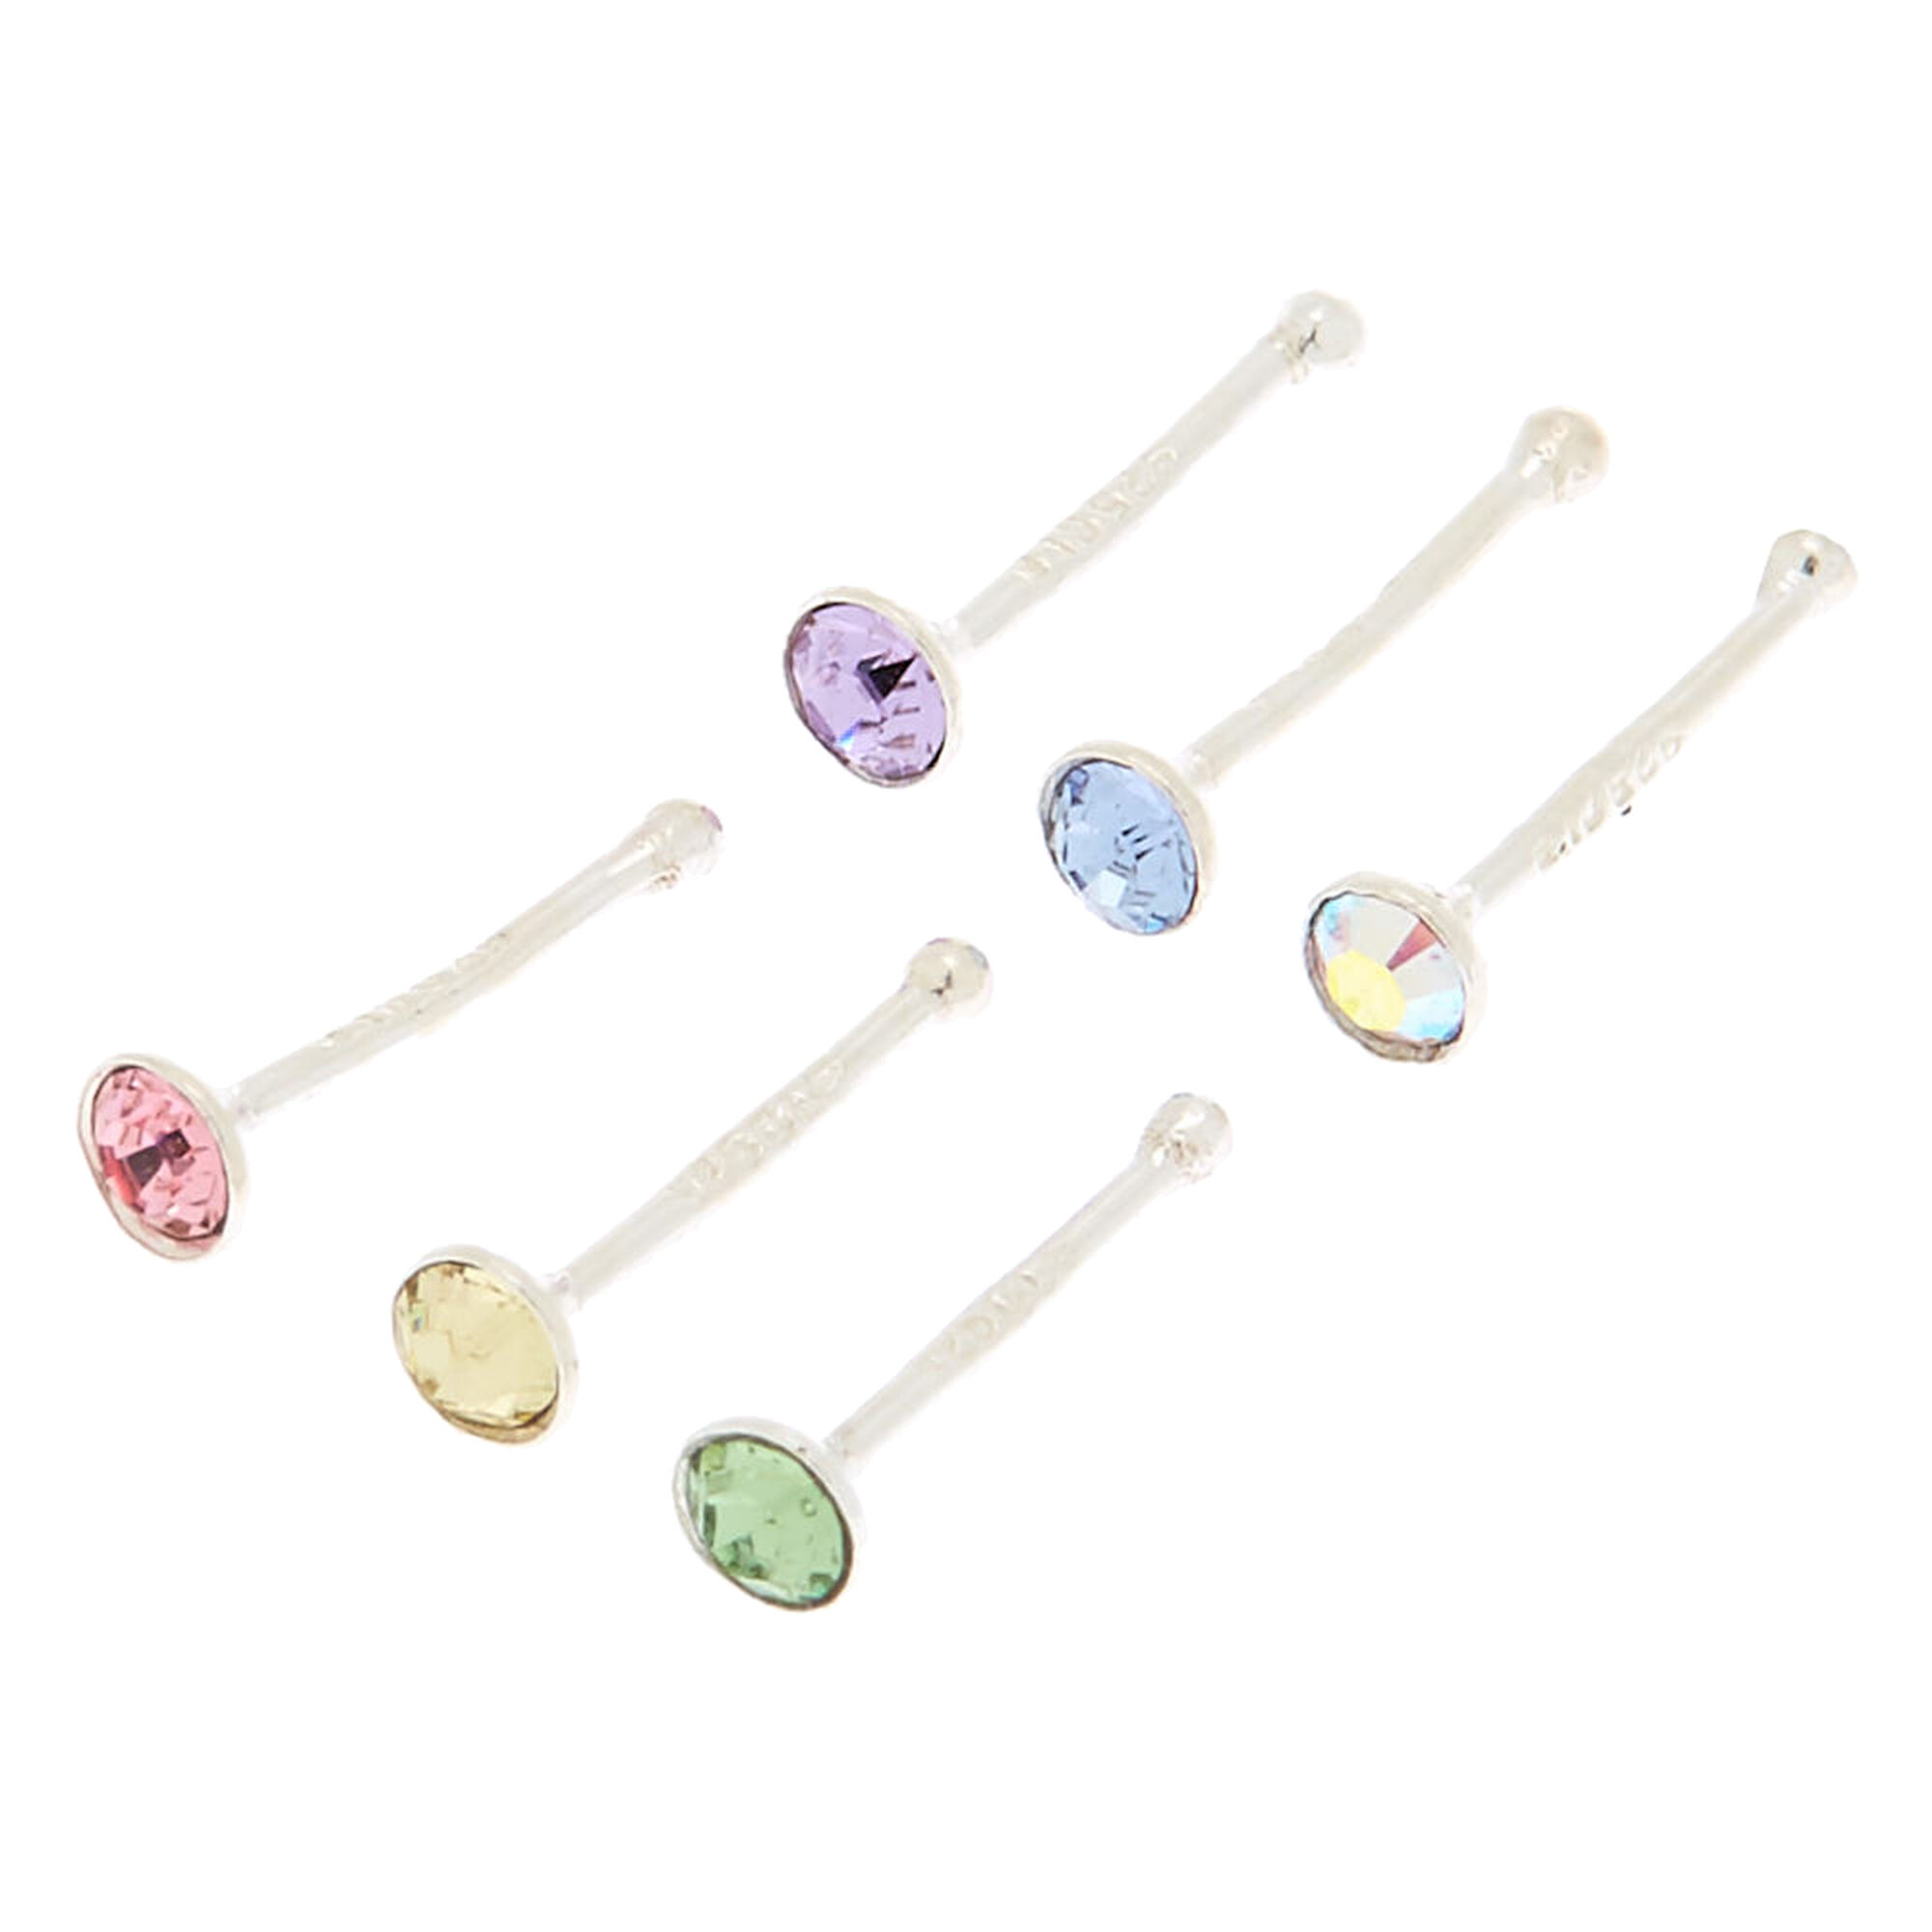 View Claires Tone 22G Pastel Crystal Nose Studs 6 Pack Silver information